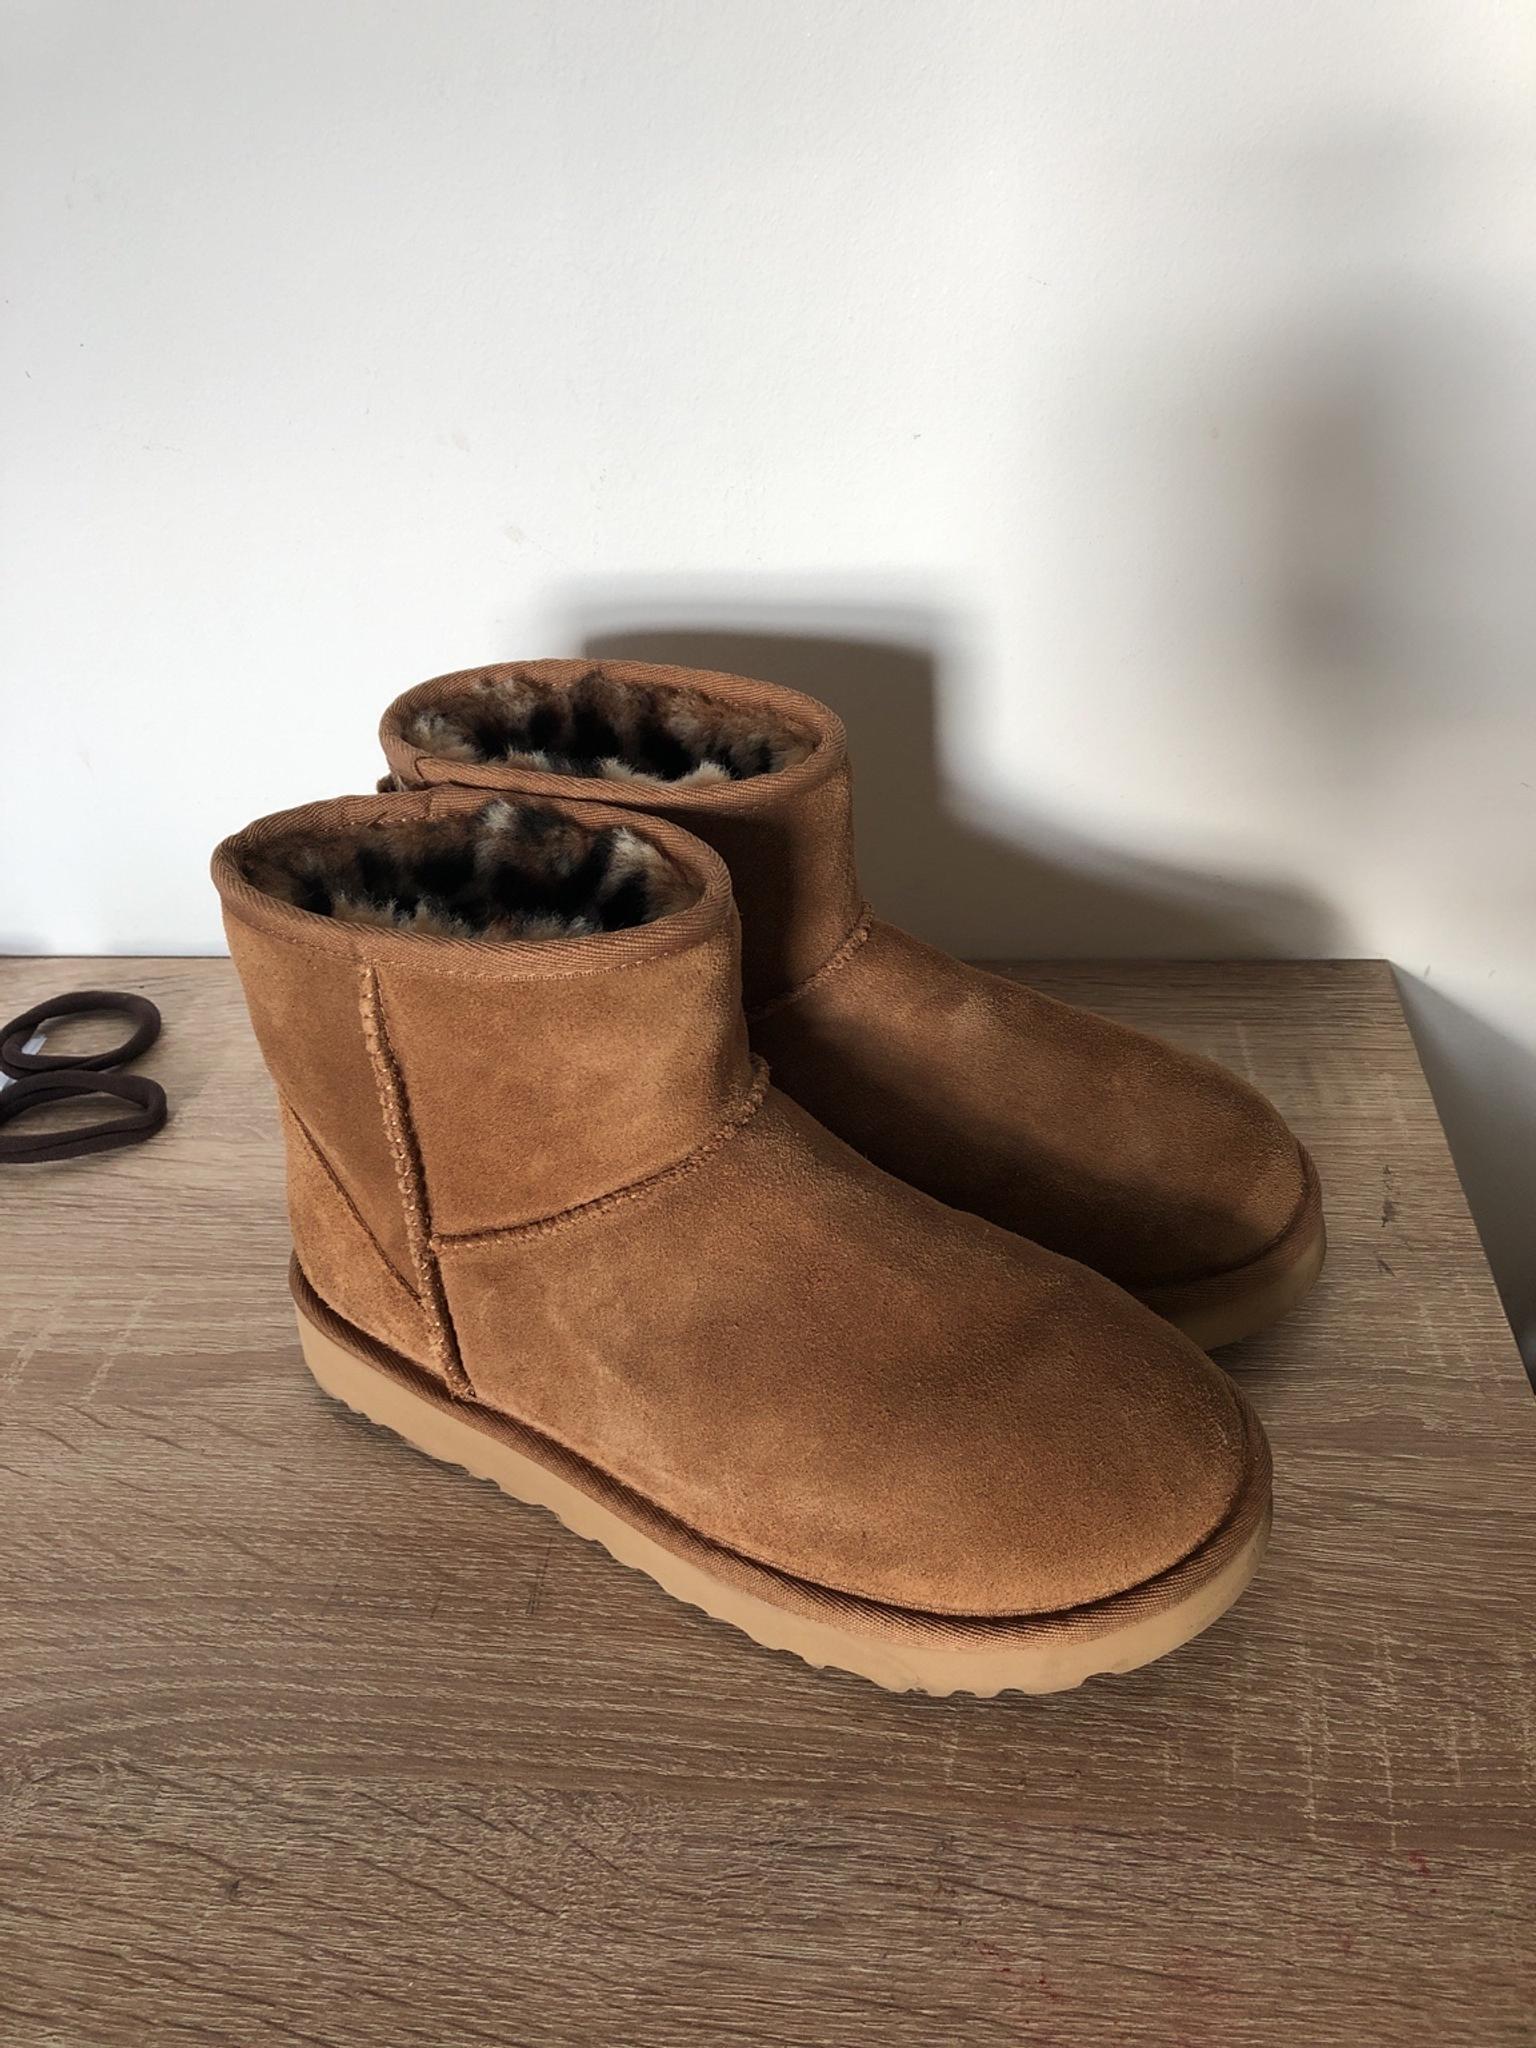 cheap ugg boots size 4